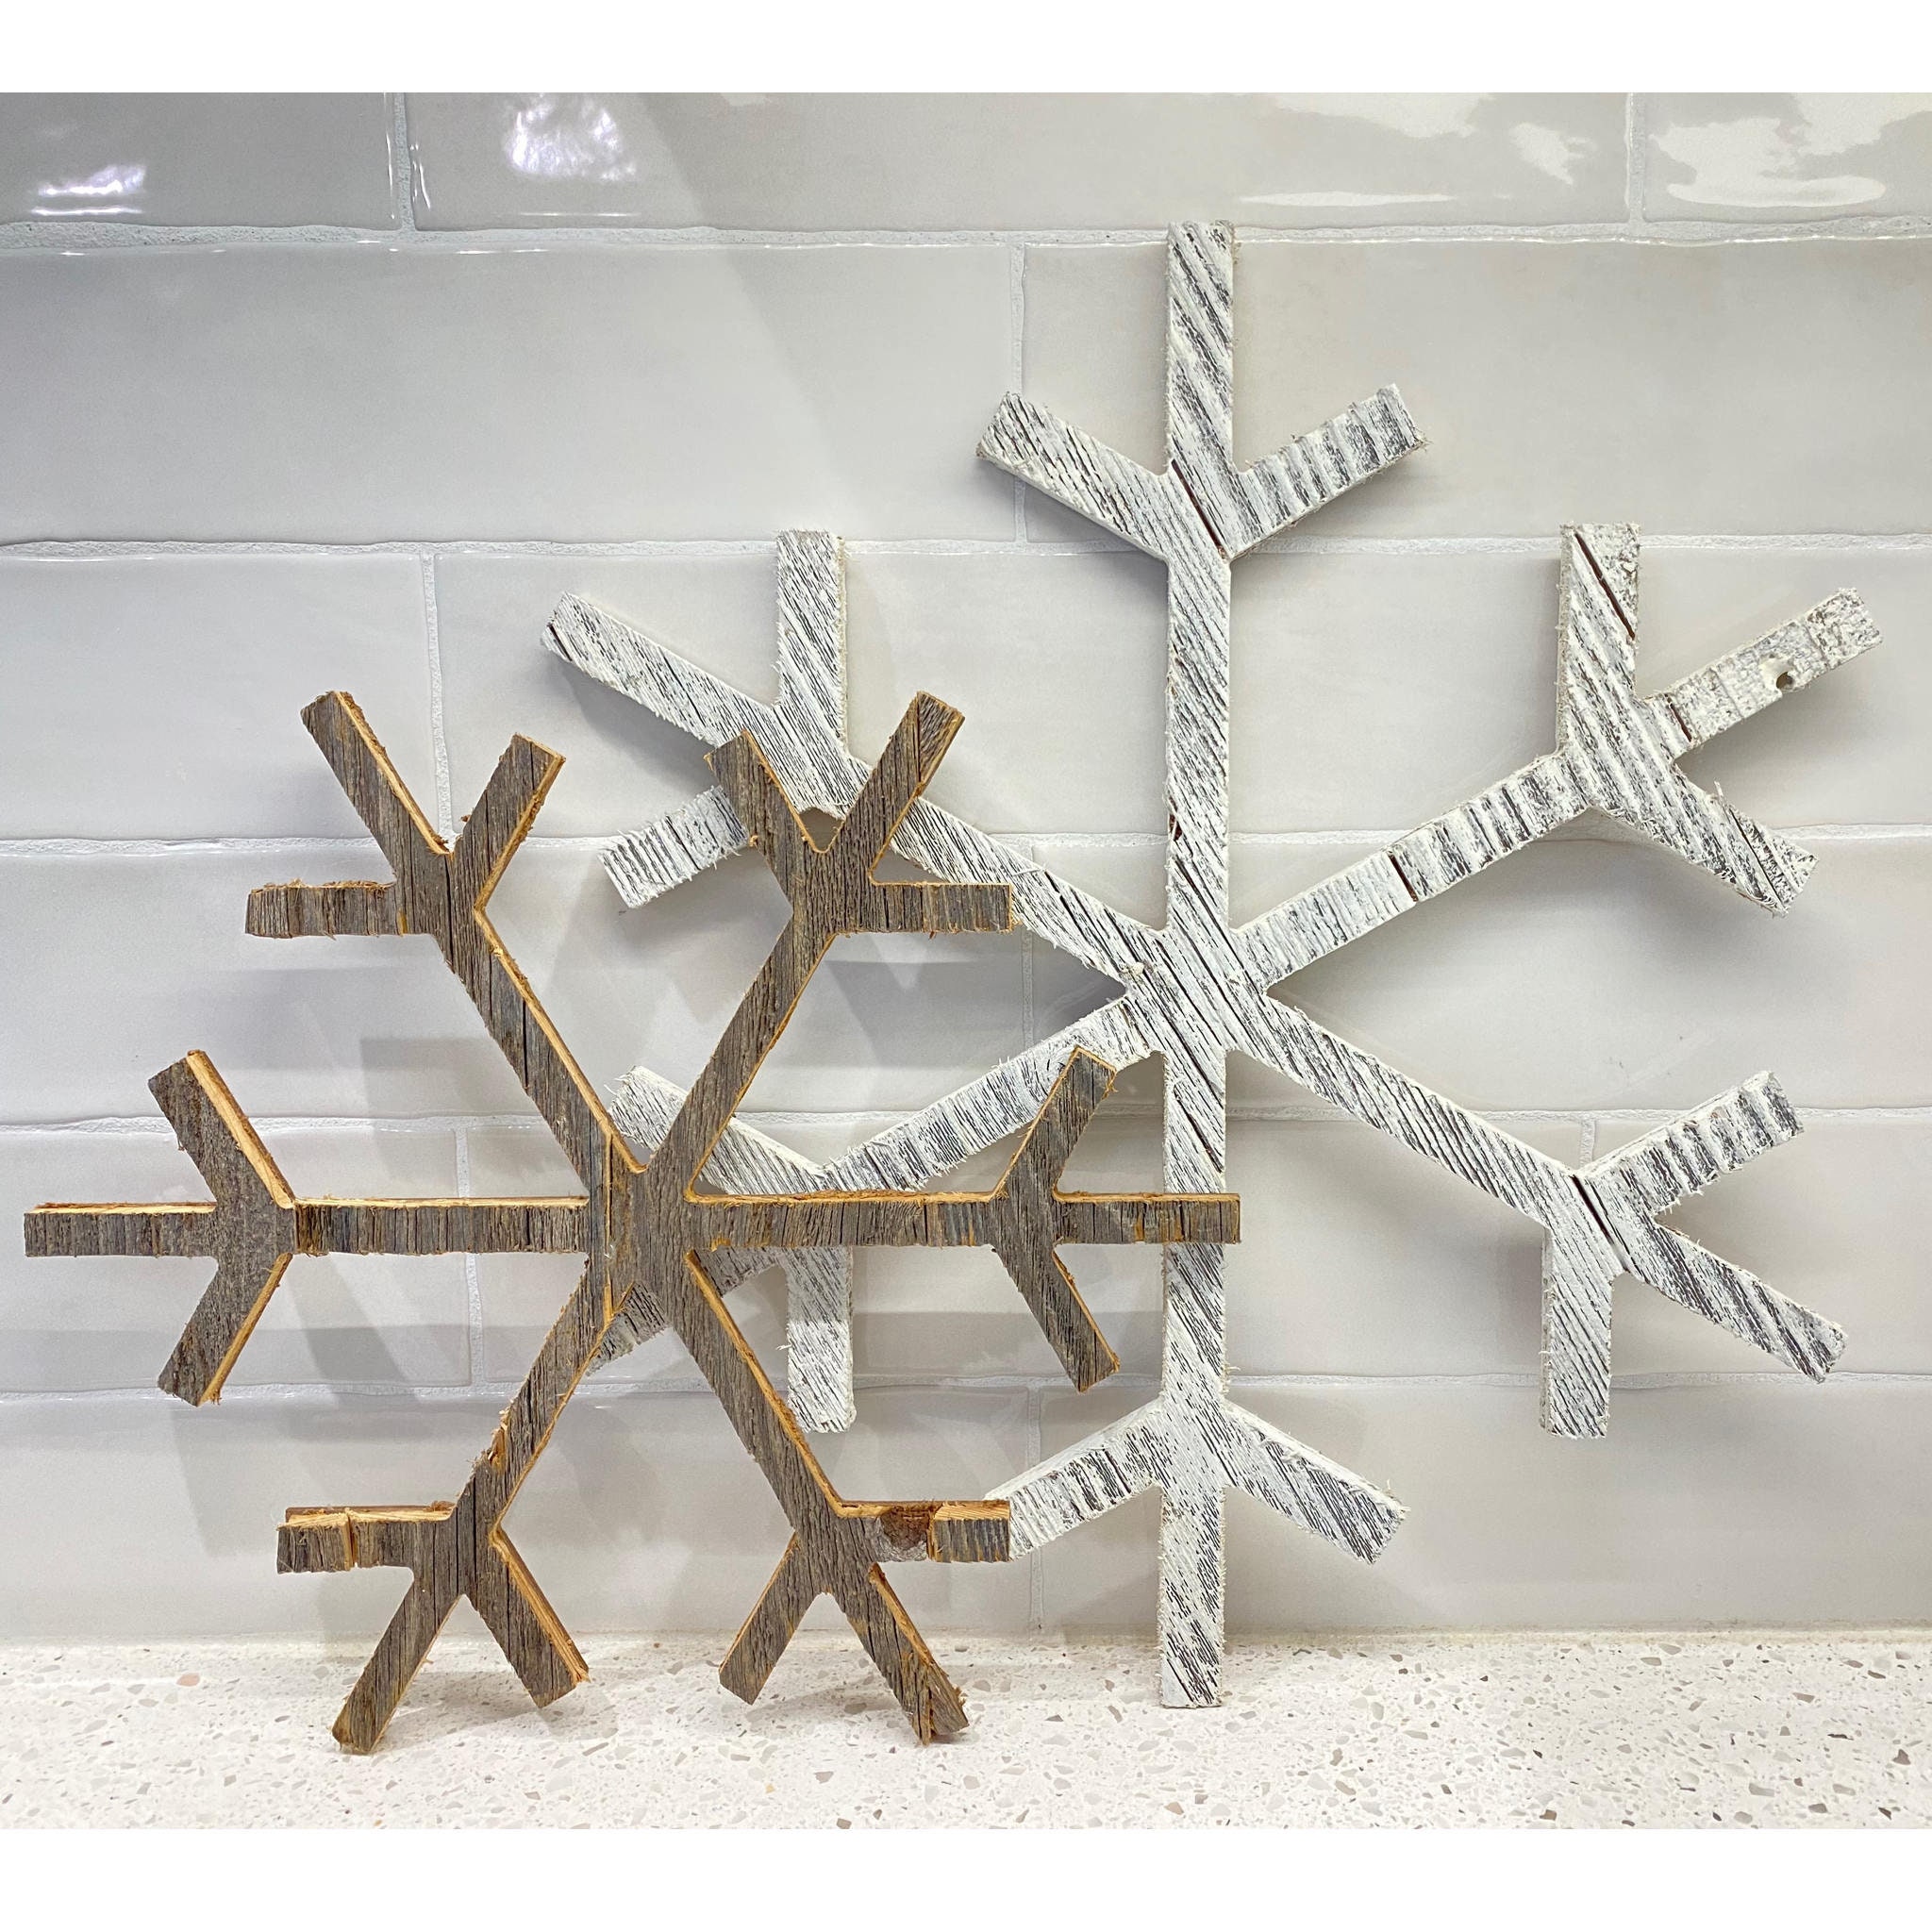 12 Pcs Christmas Unfinished Wooden Snowflake Ornaments for Crafts Unfinished Predrilled Wood with Cords for Decoration, Size: 13